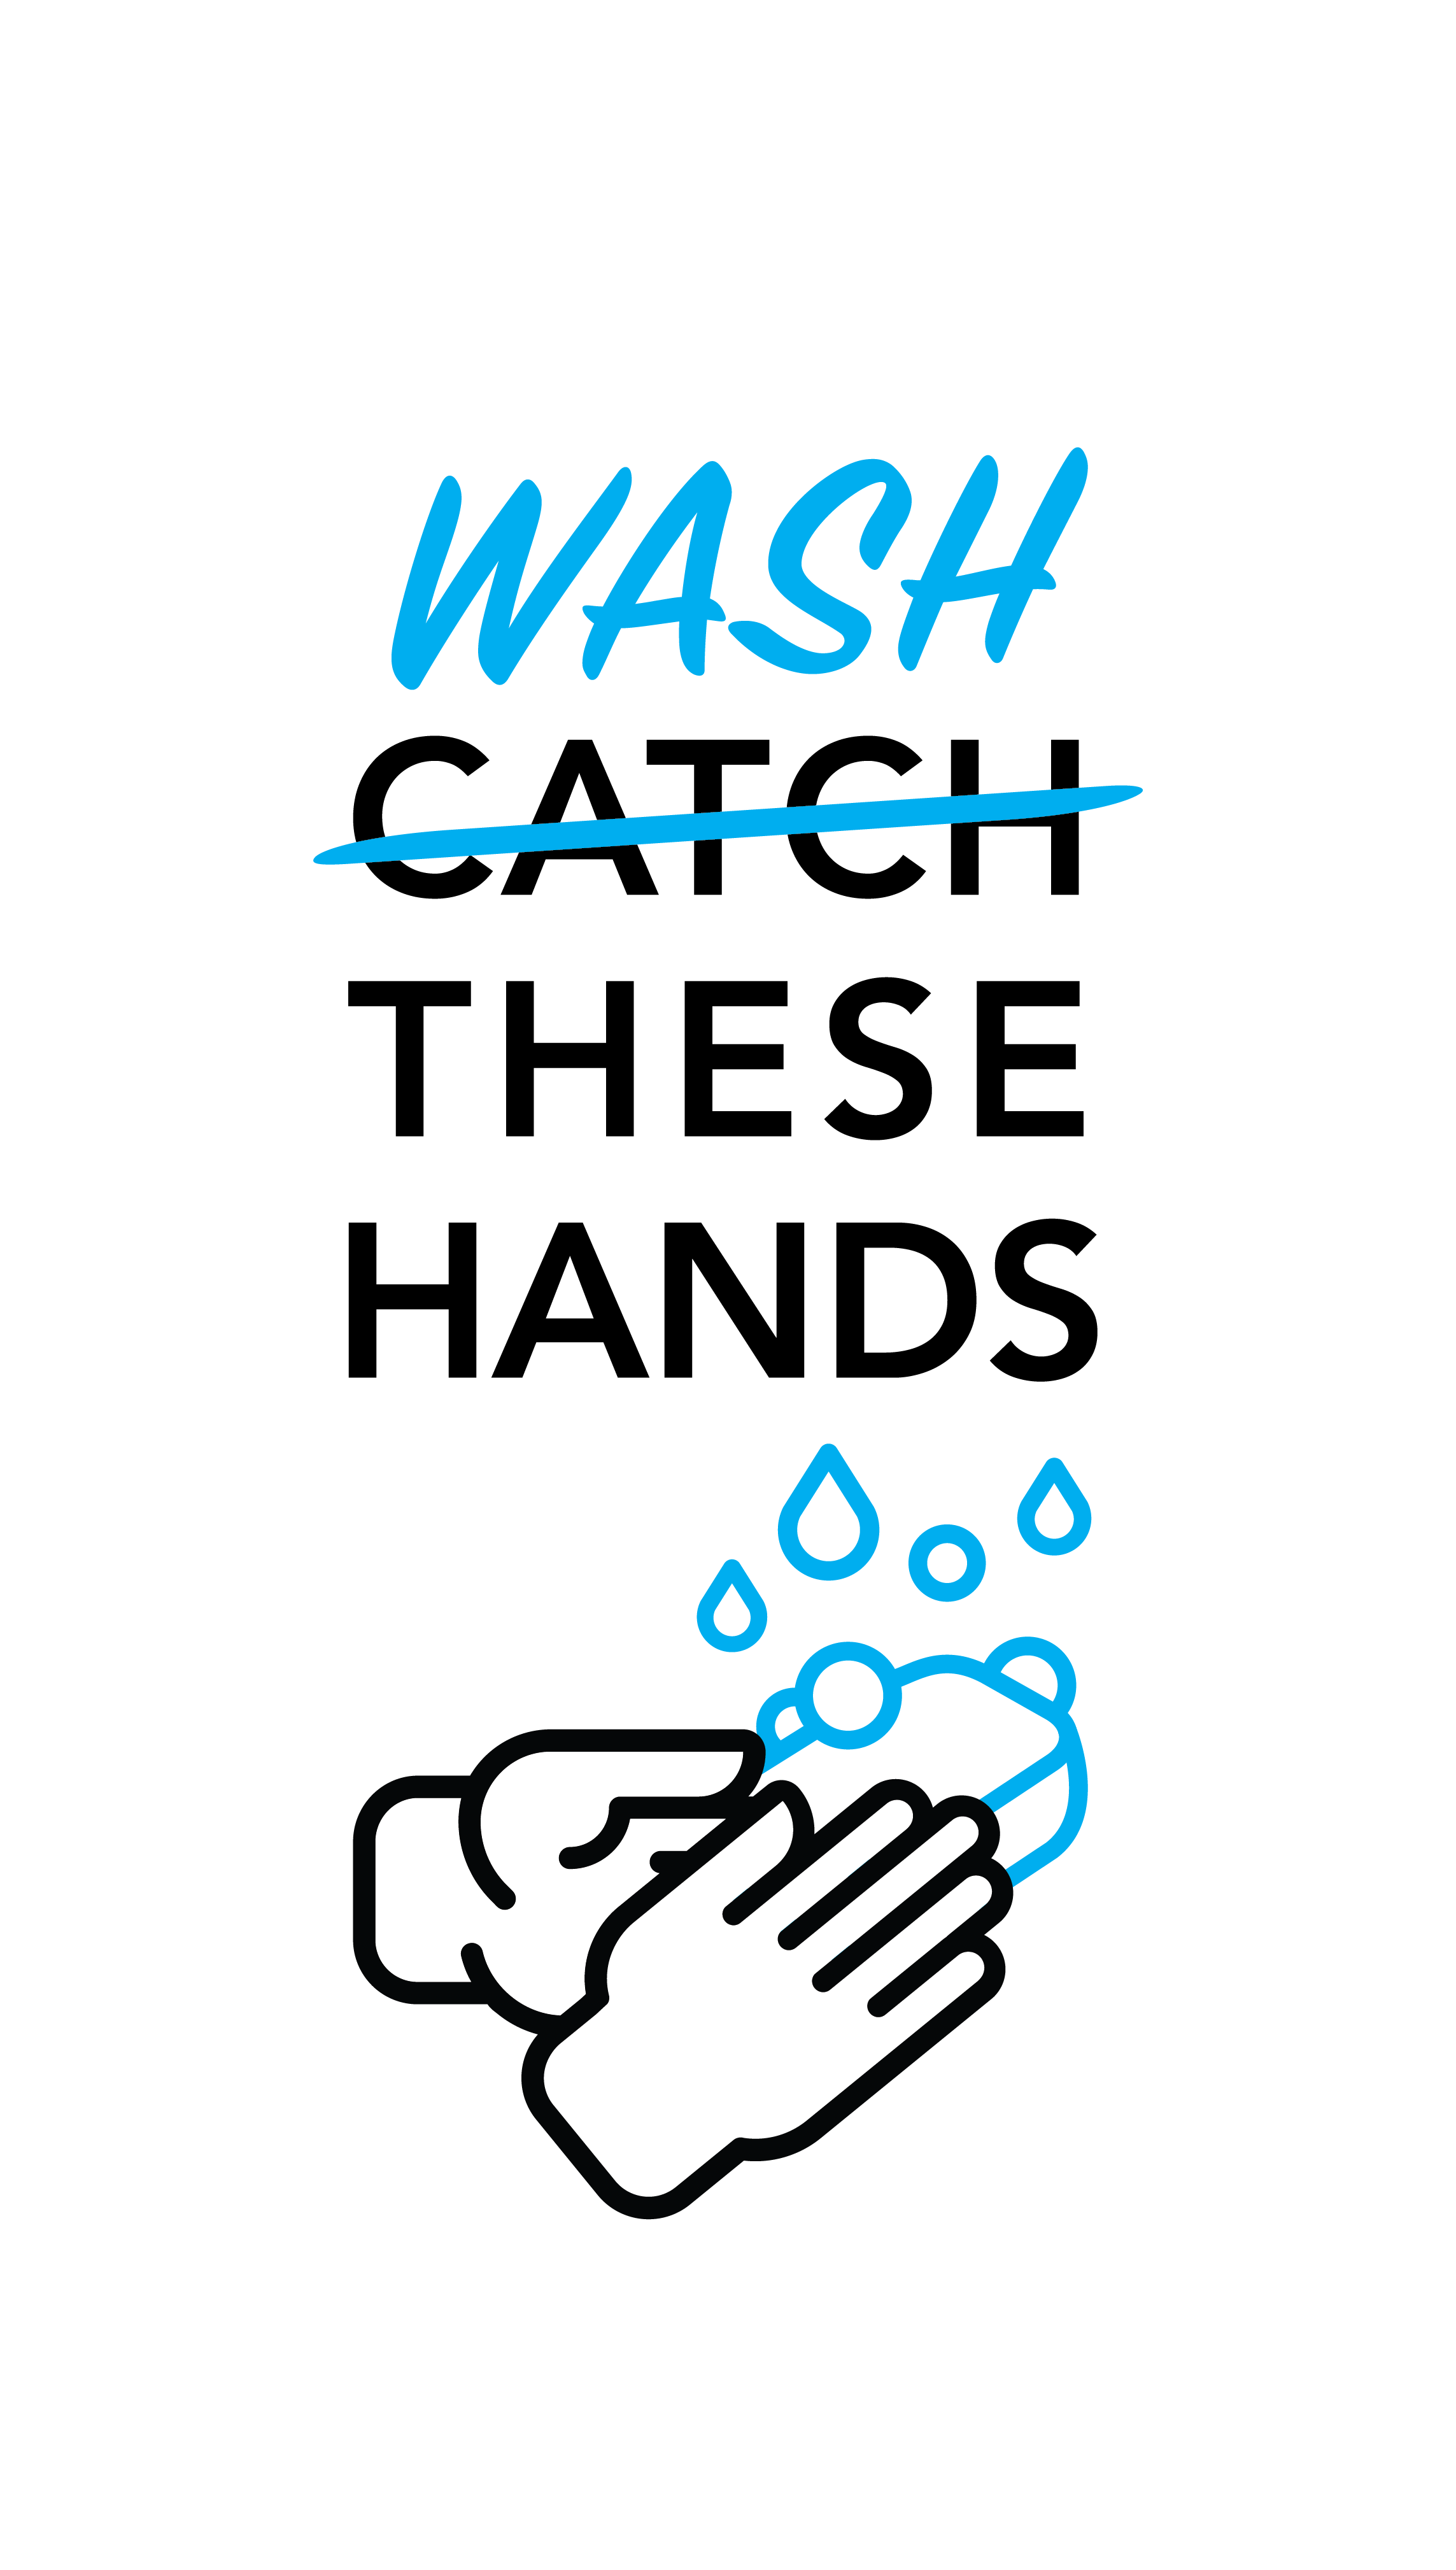 Wash these hands